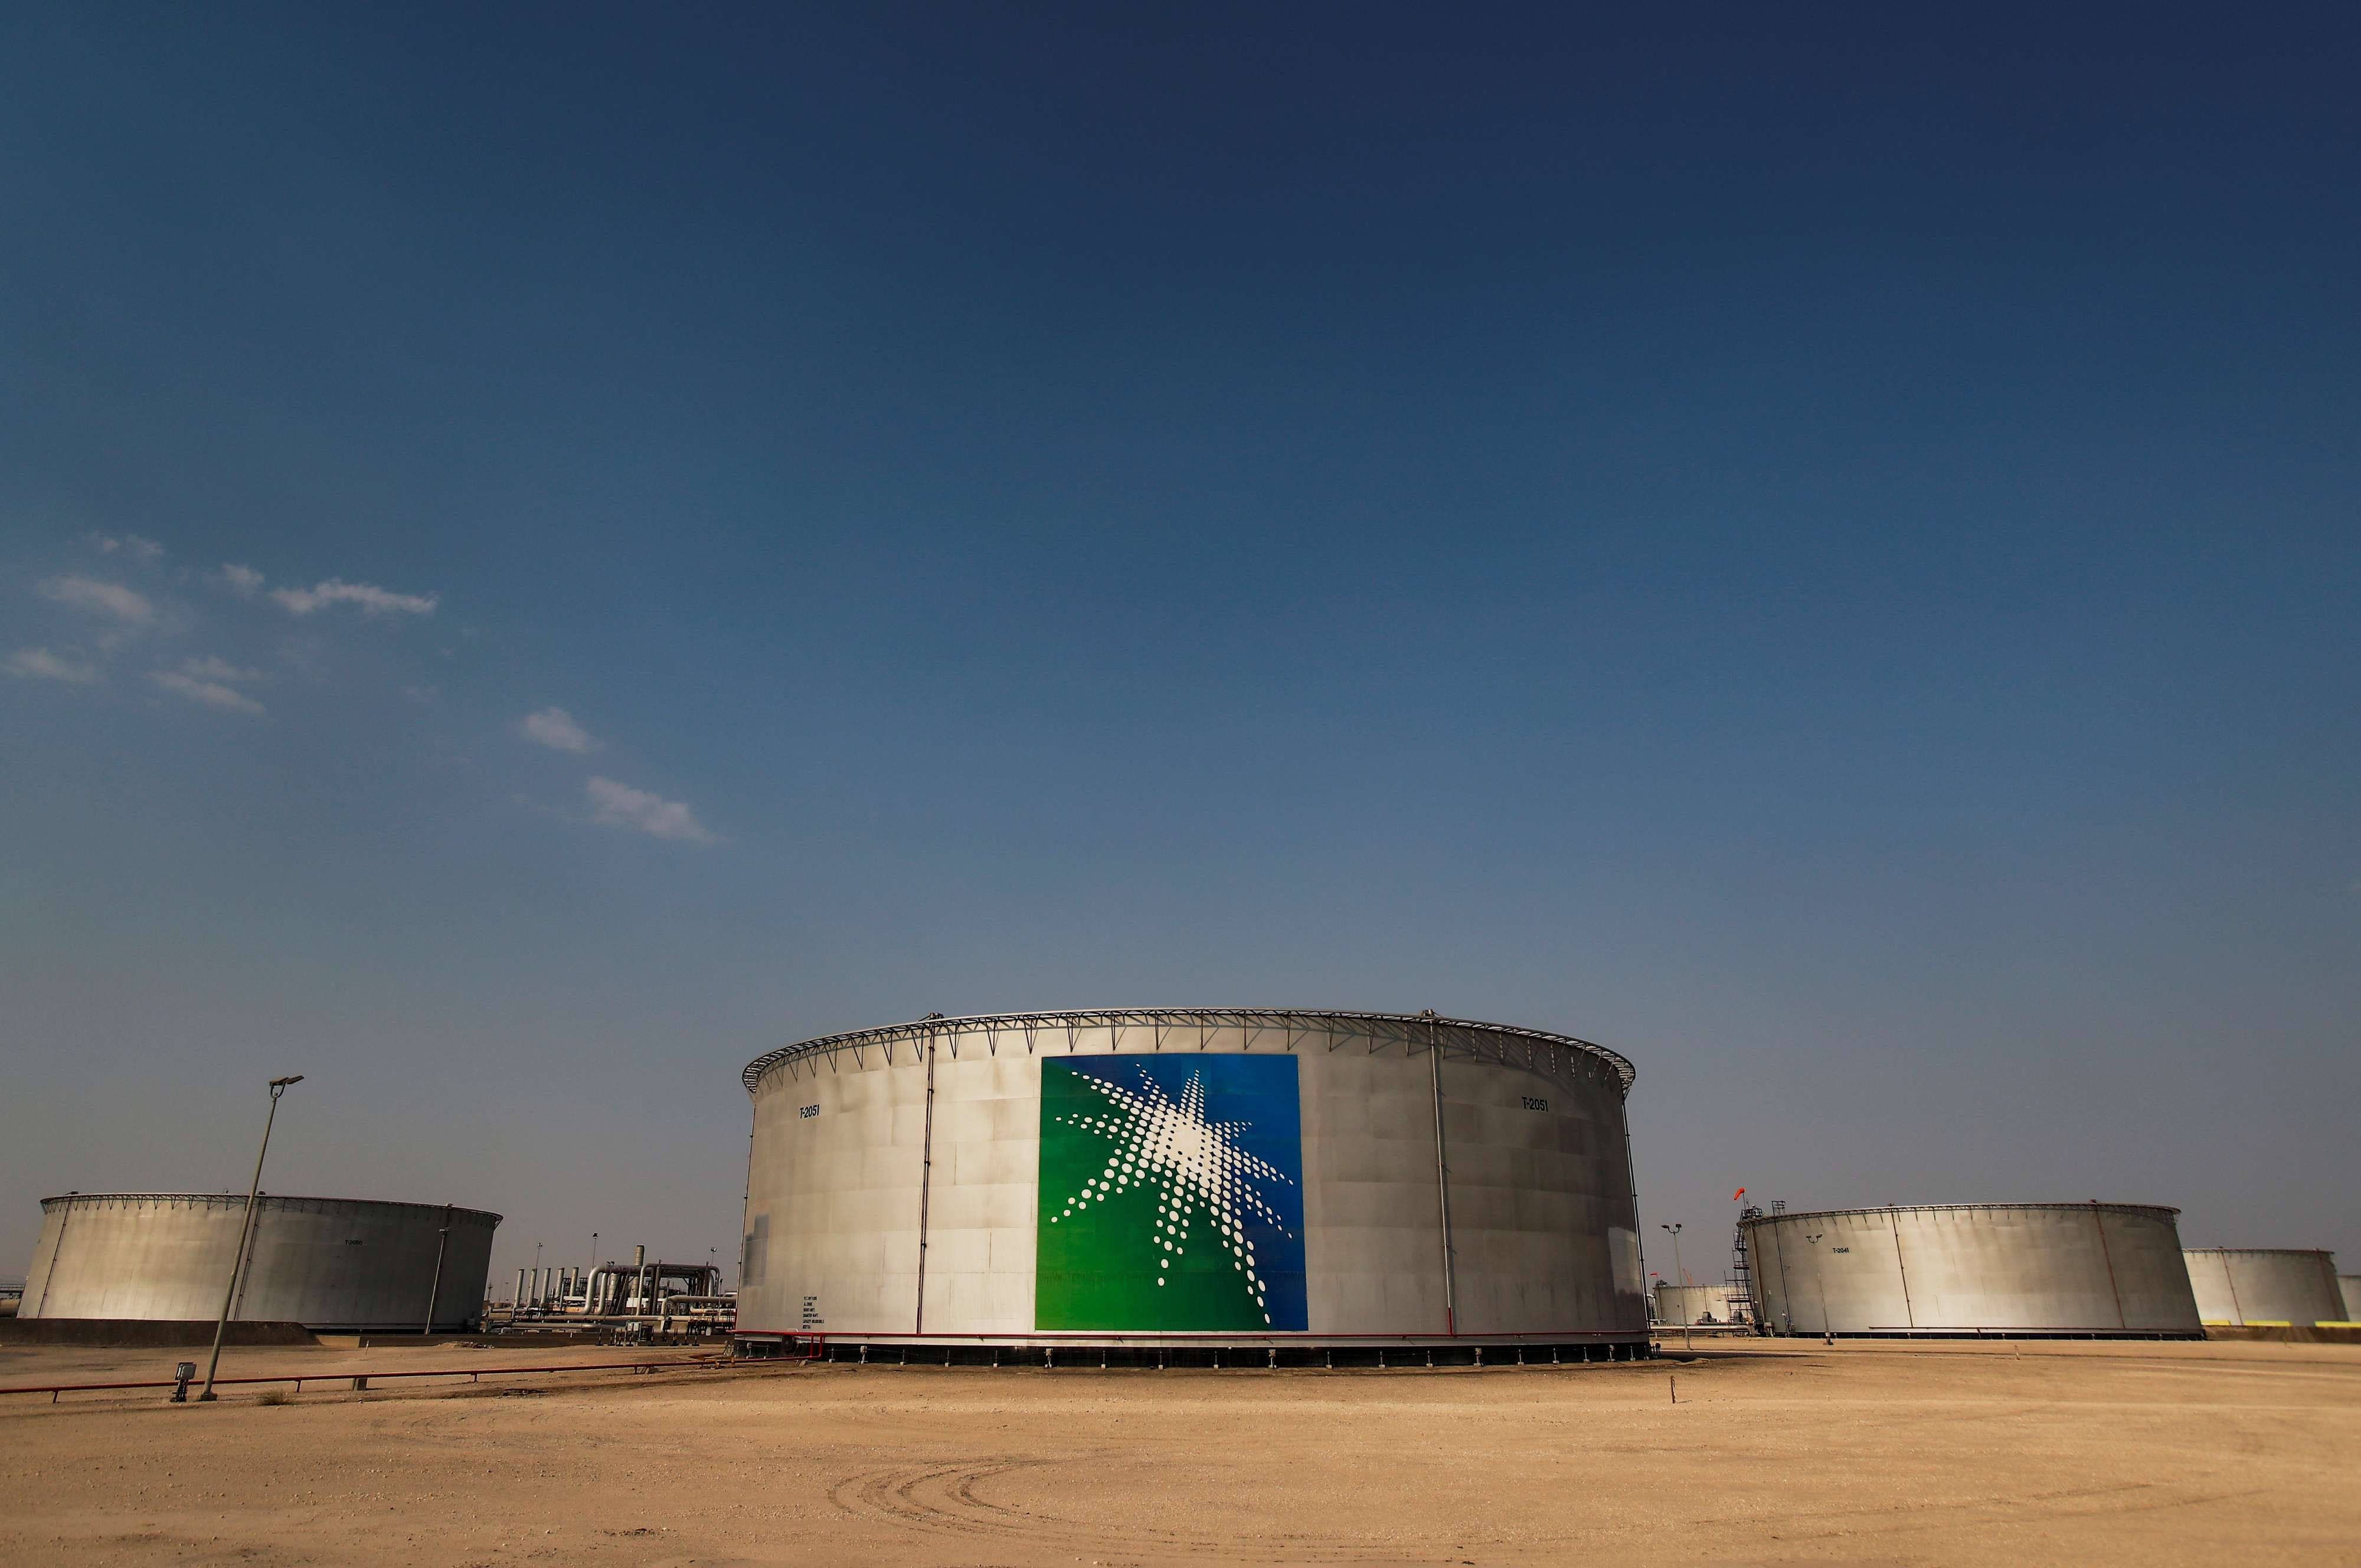 These are the first financial results after Aramco's historic $29.4 billion initial public offering